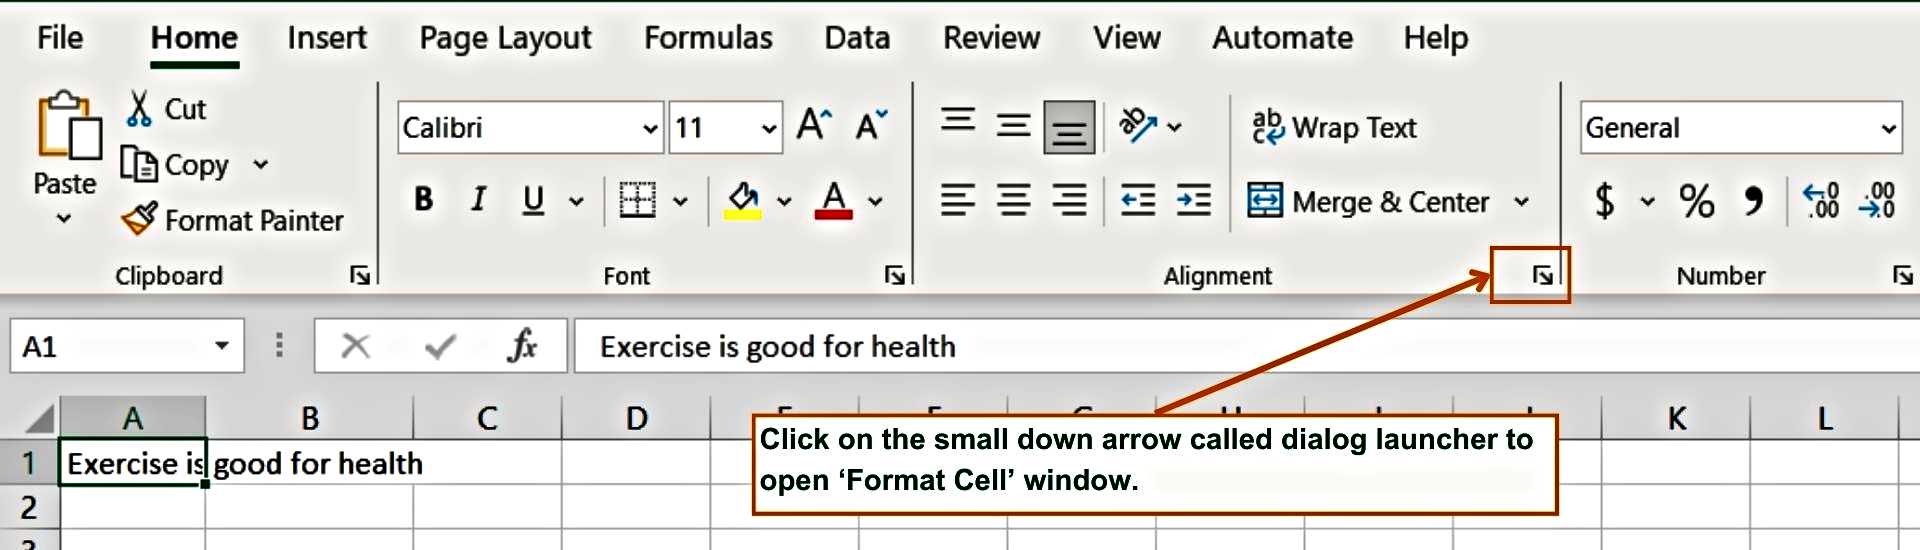 Alignment Dialog Launcher for Wrap Text - Excel Hippo Module - How to Wrap Text in Excel